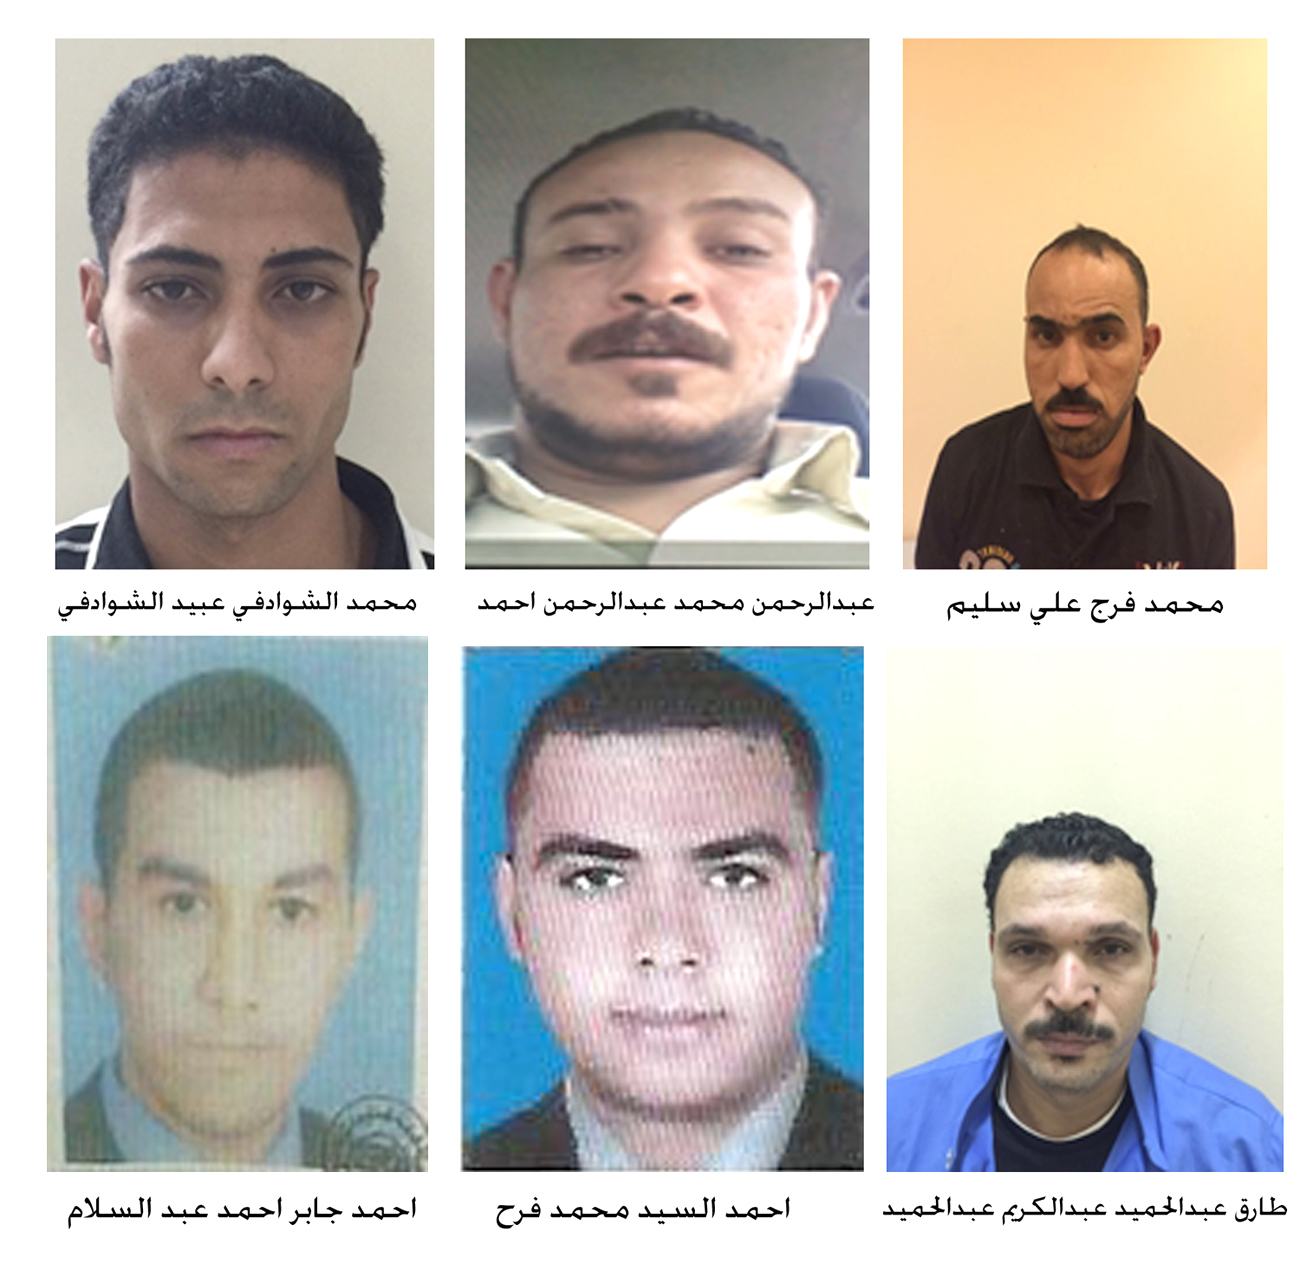 6 expats arrested for offending Kuwait - MOI